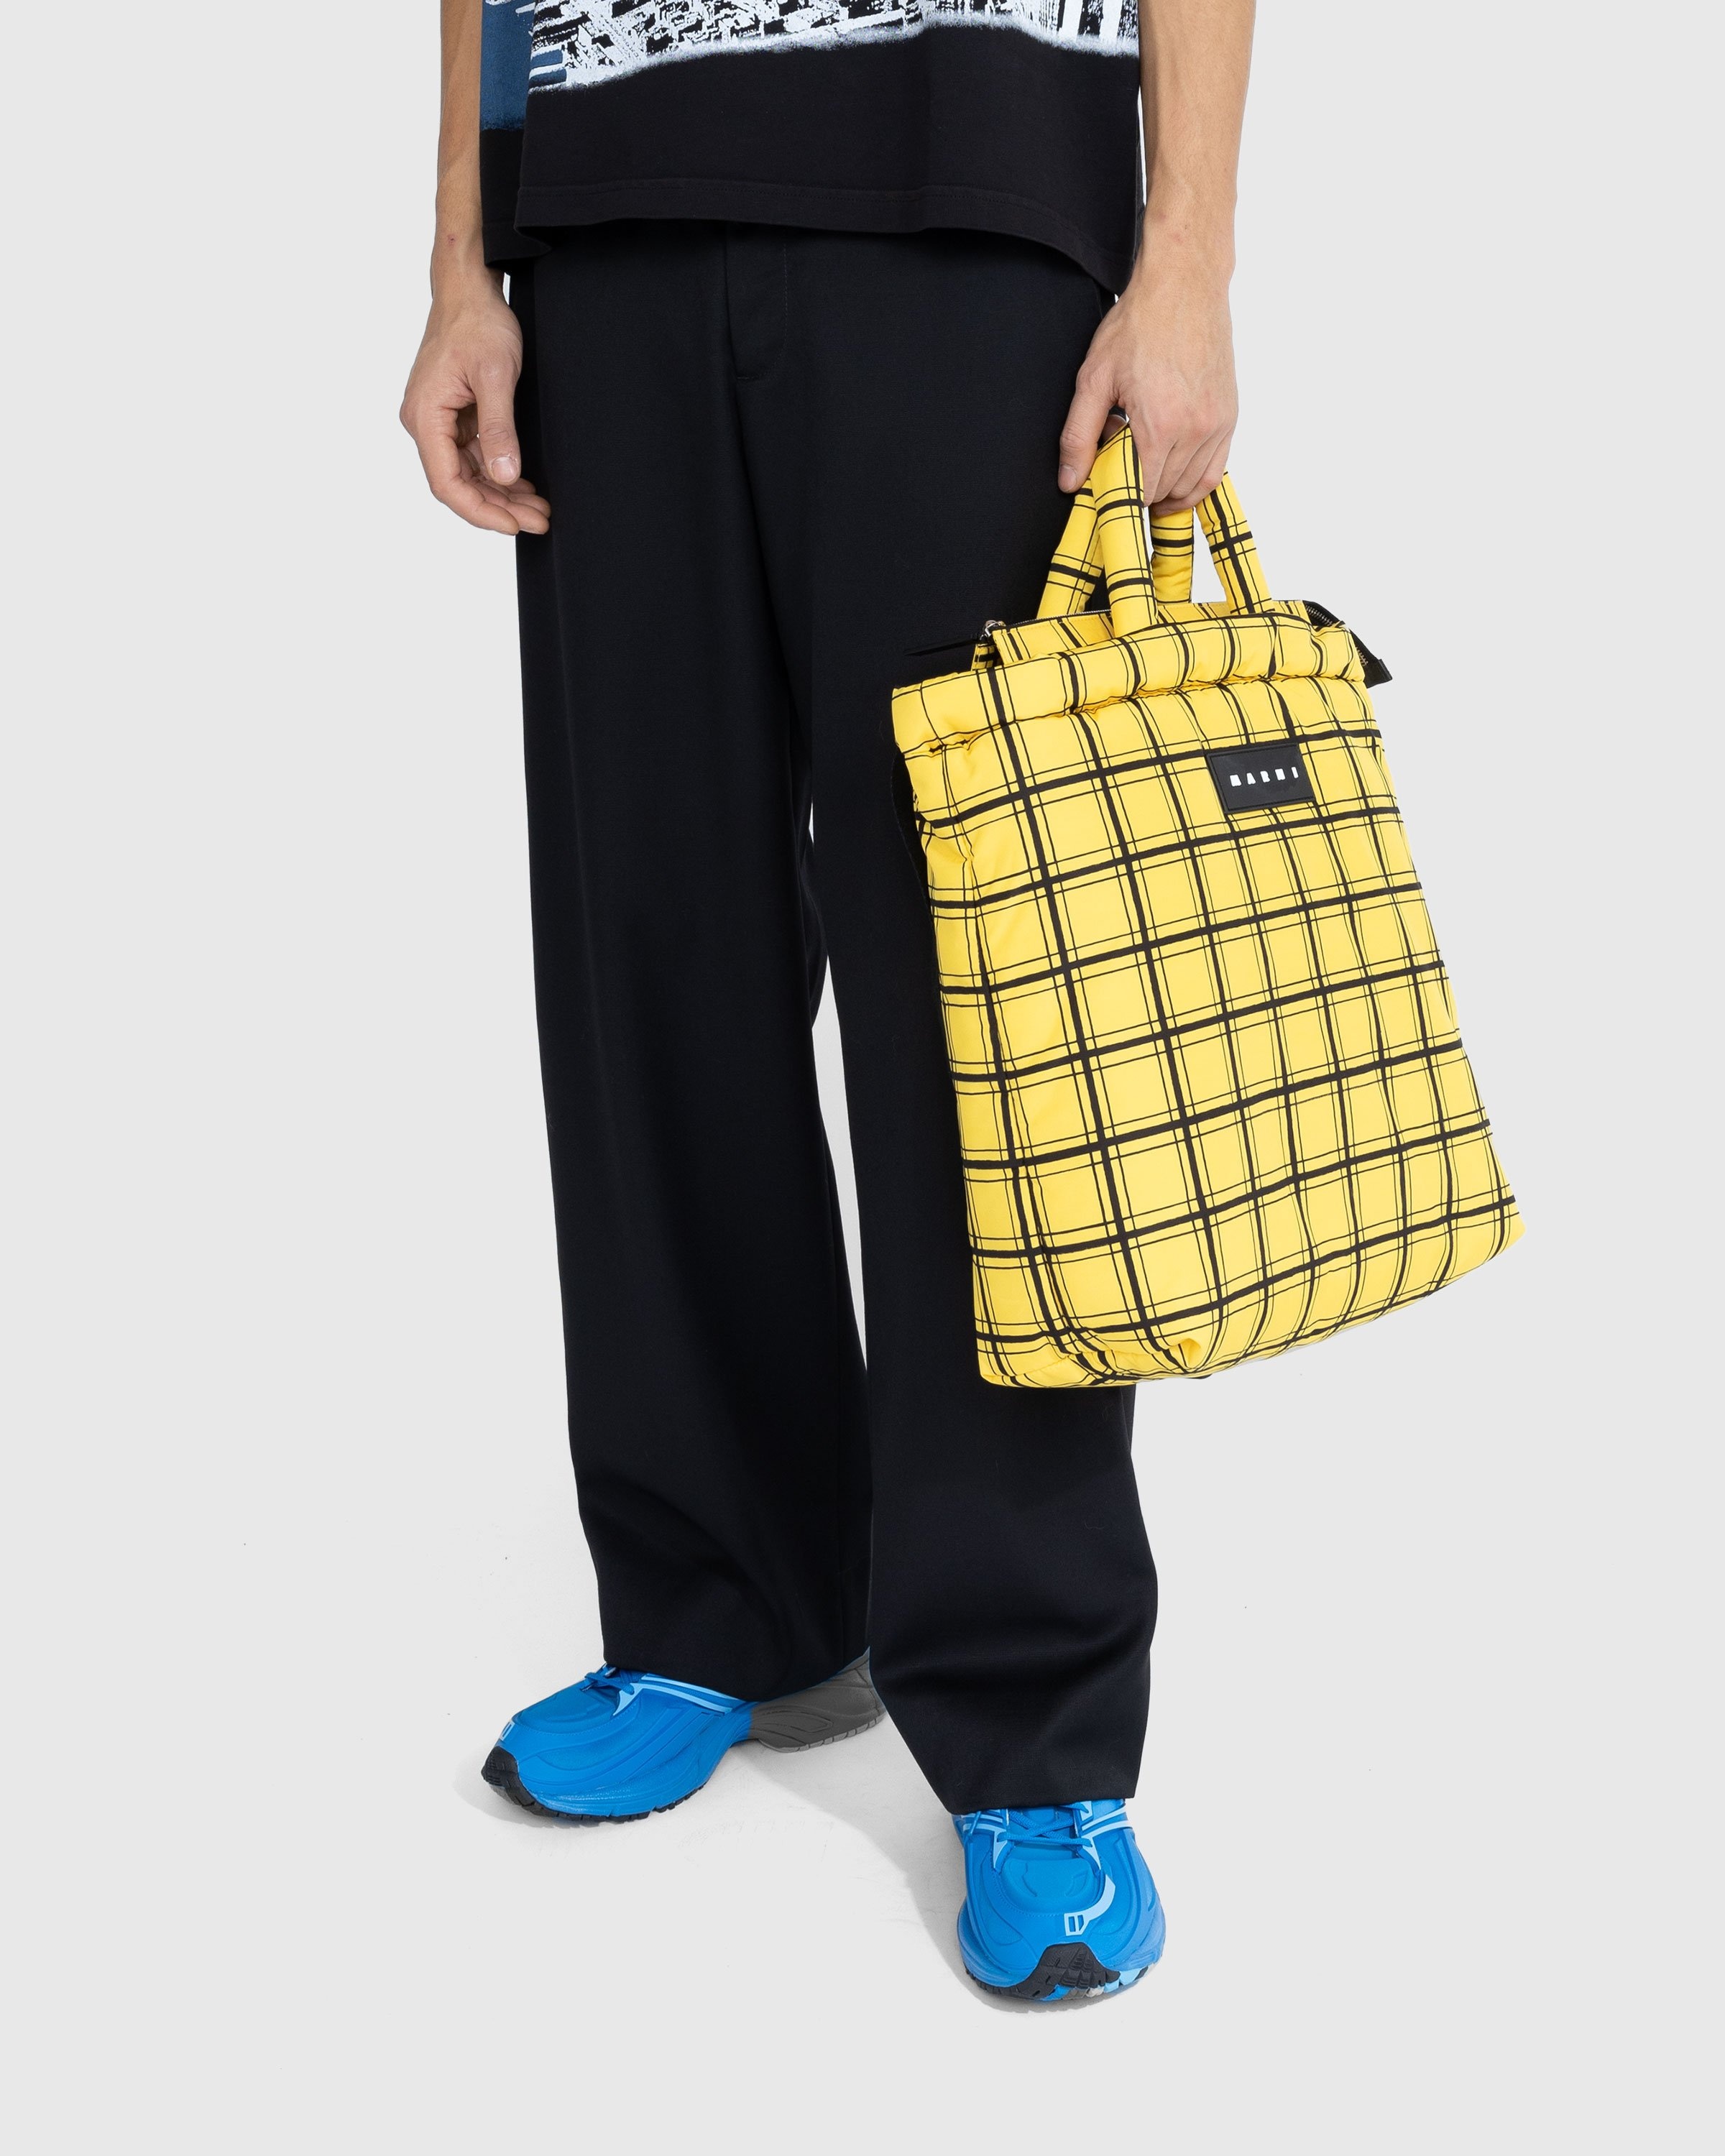 Logo Padded Tote Bag in Yellow